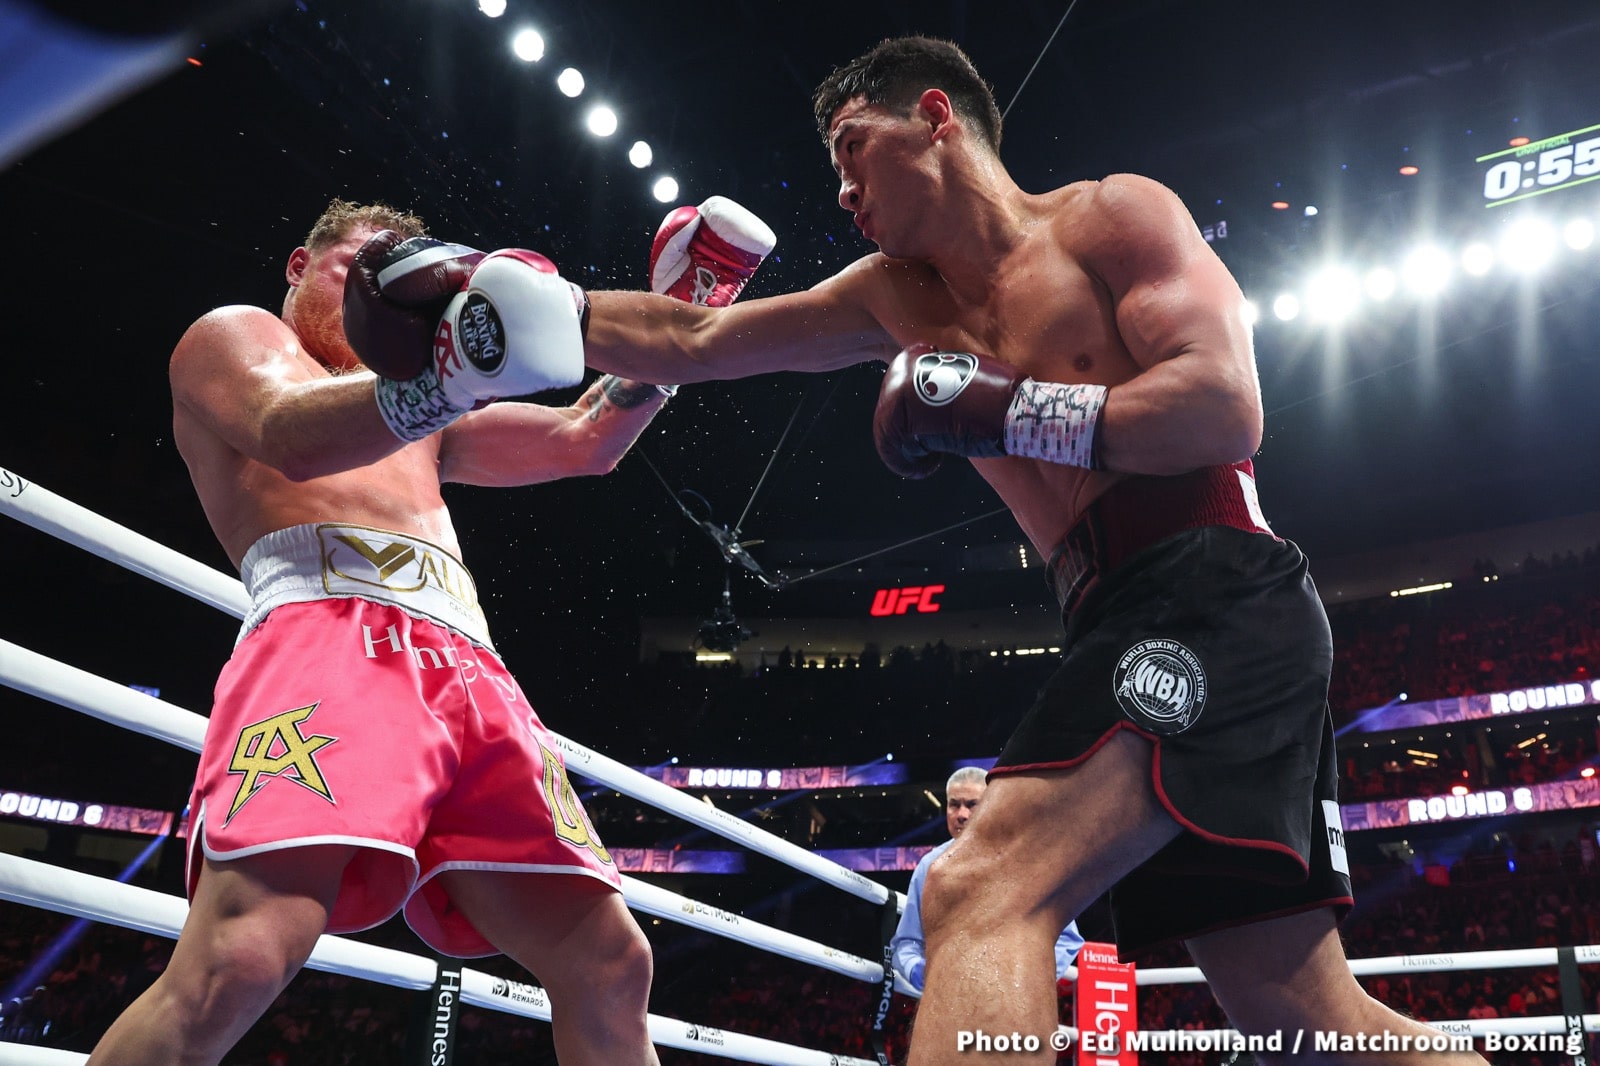 Bivol defeats Canelo in upset win - Boxing Results